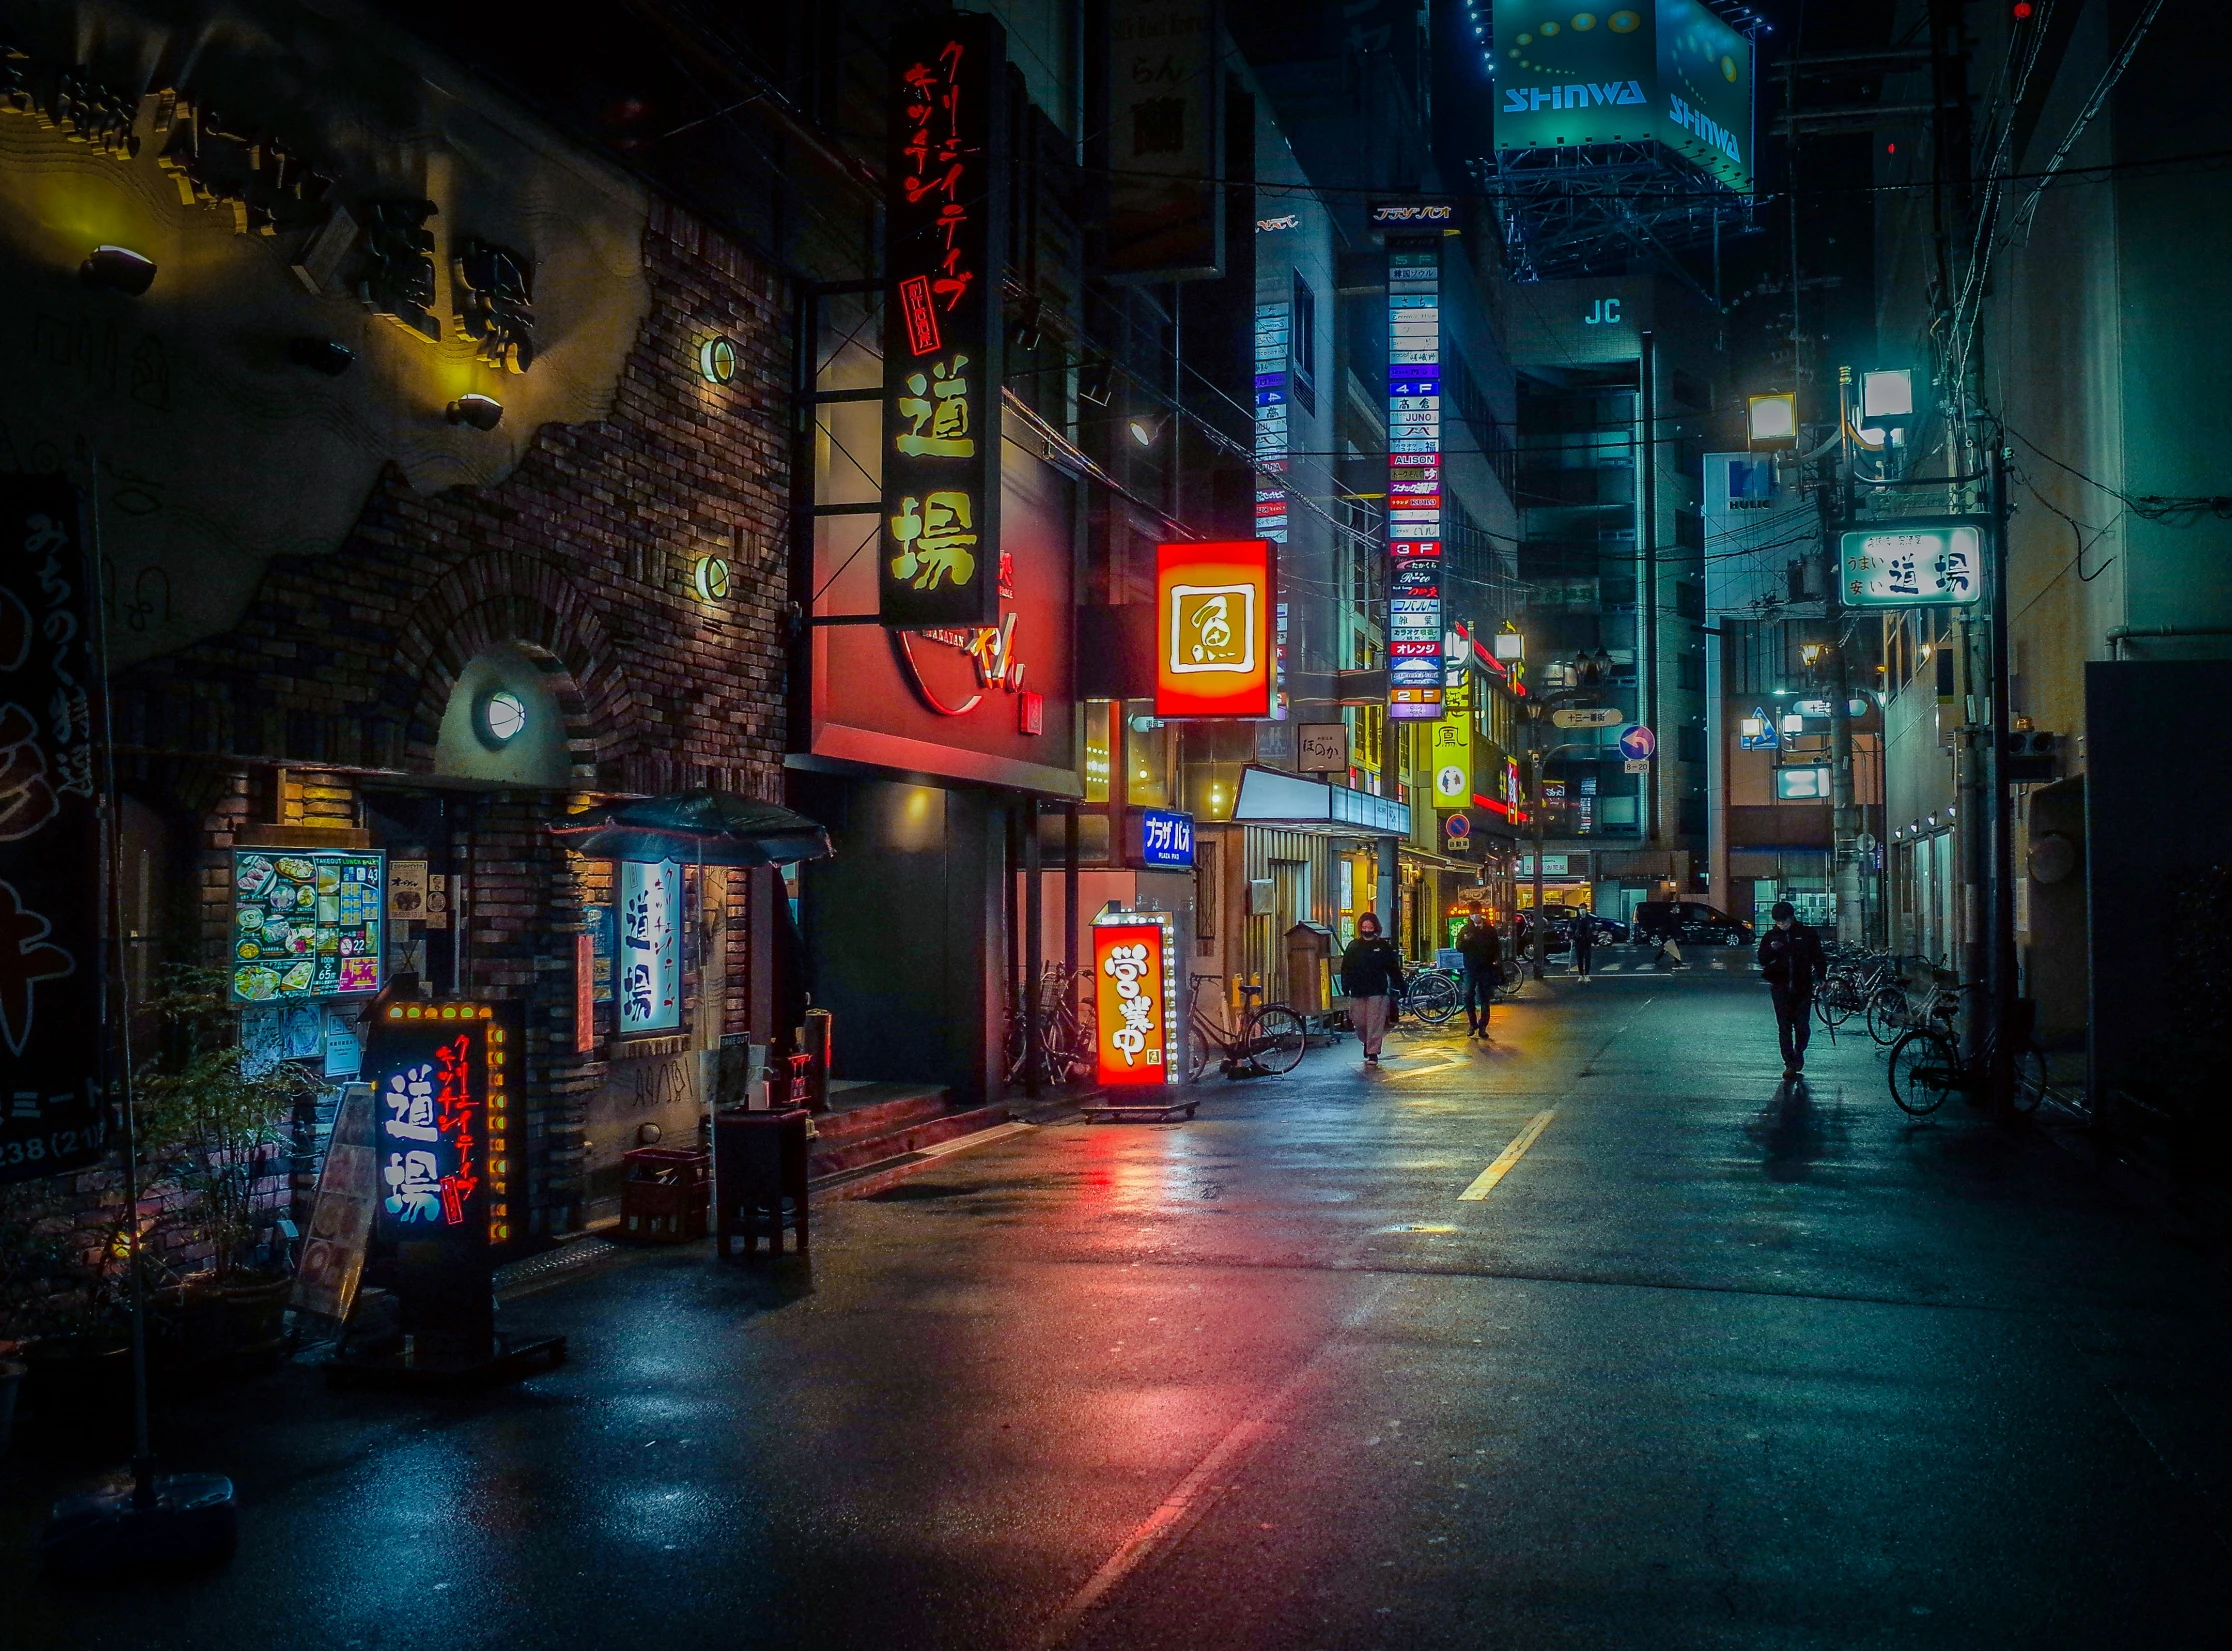 the streets in a large city at night are filled with neon signs